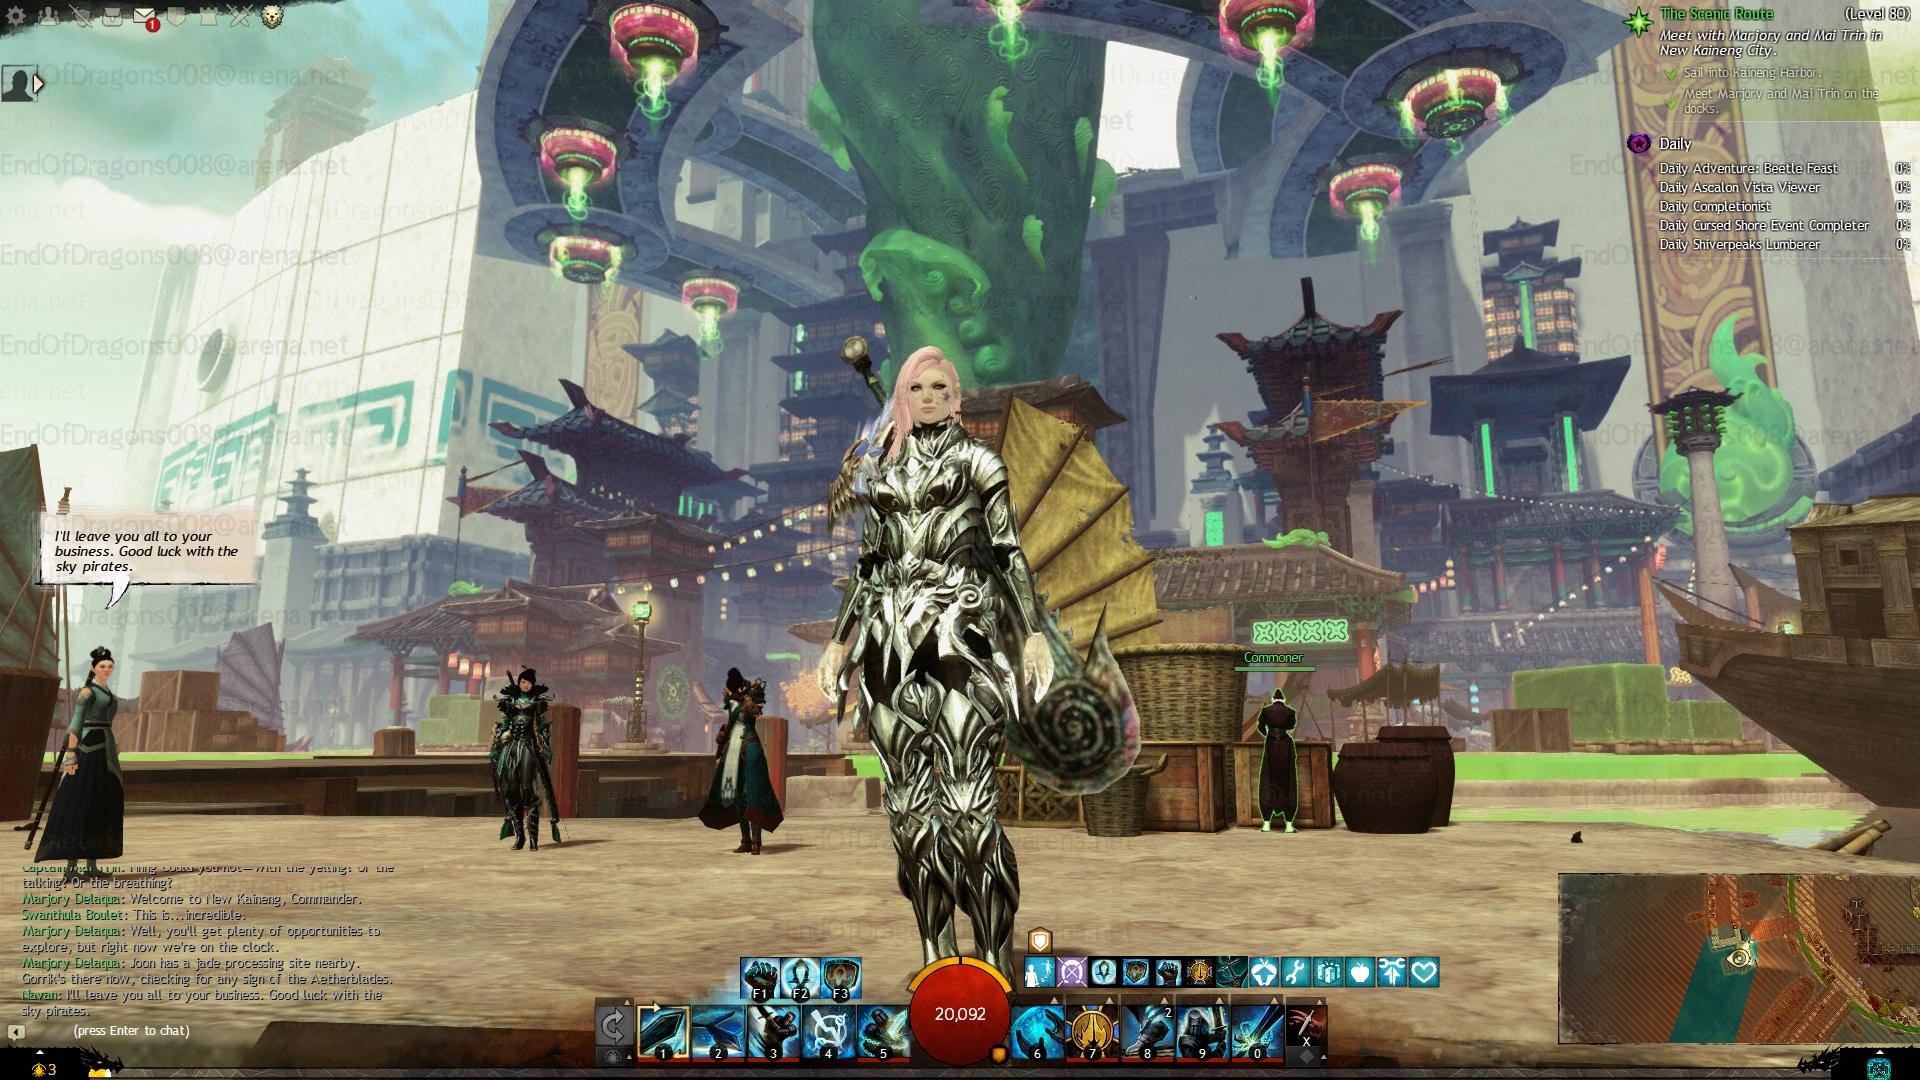 guild wars 2 end of dragons guardian trait line class stands in new kaineng docks